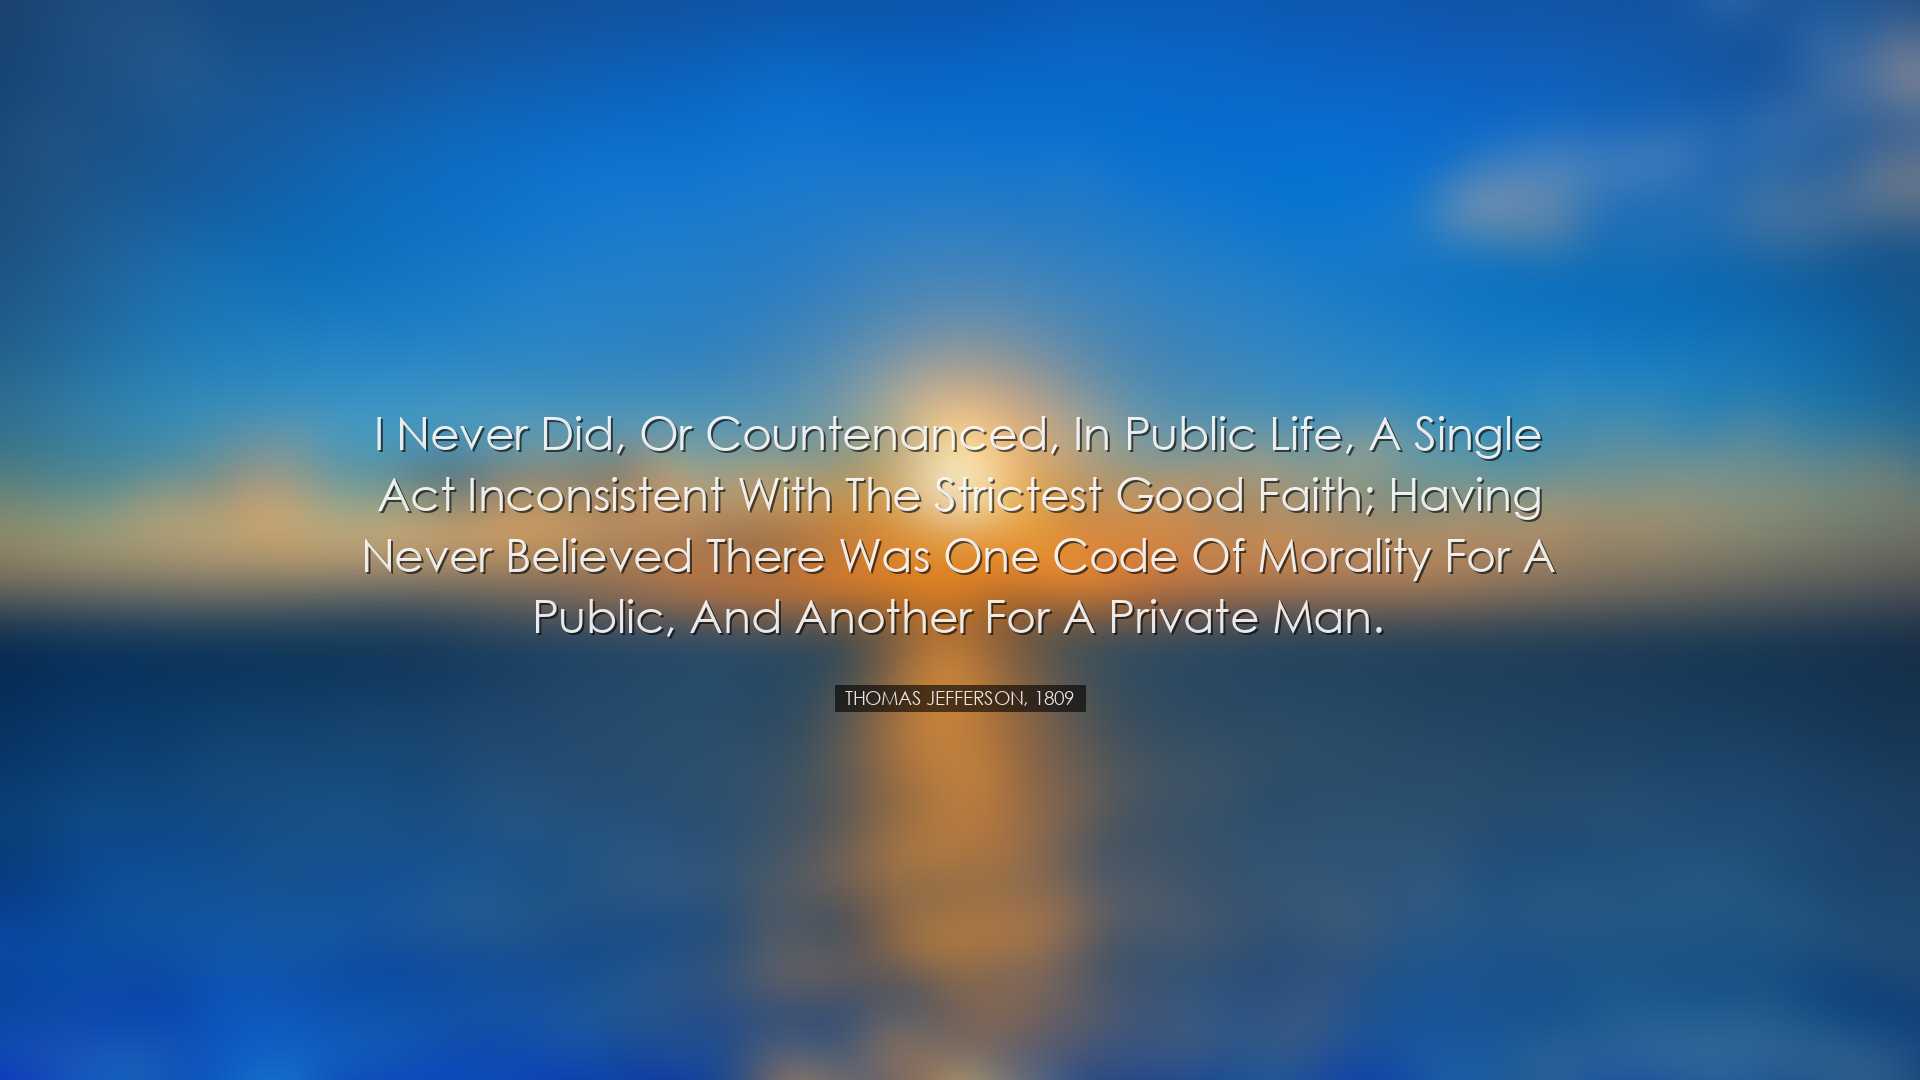 I never did, or countenanced, in public life, a single act inconsi